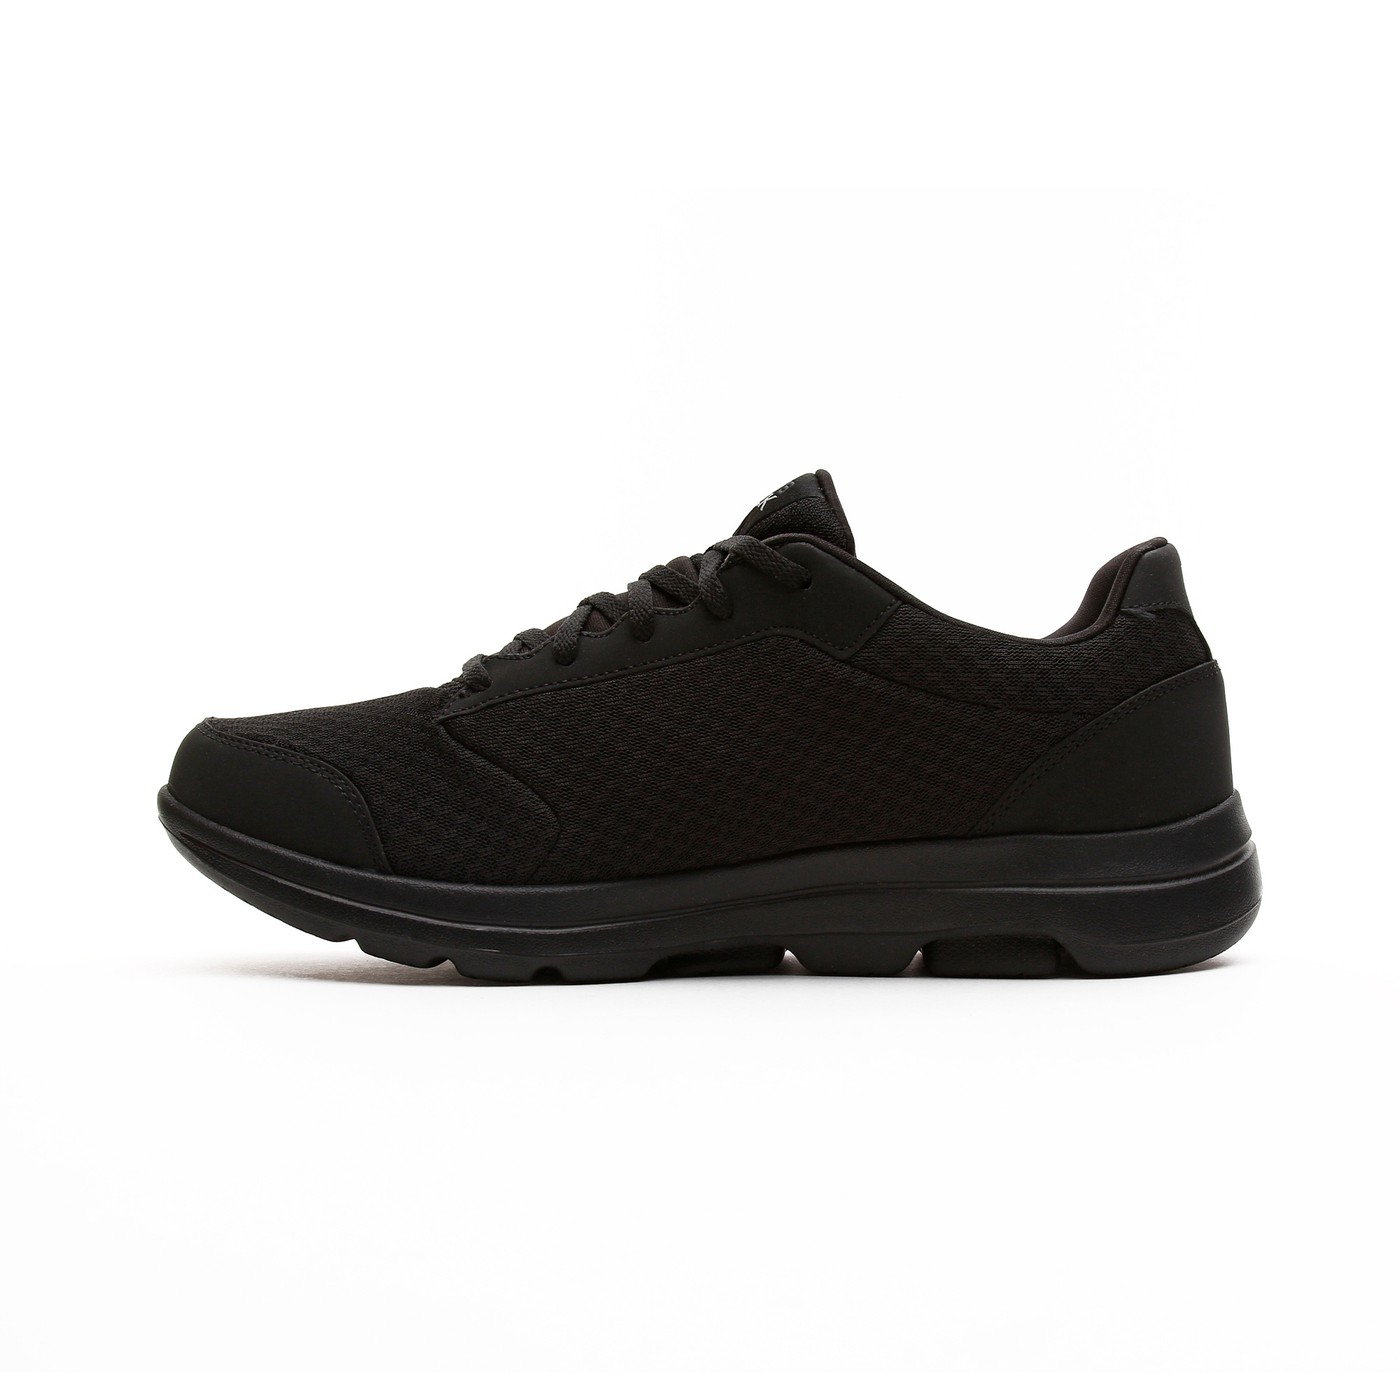 skechers shoes new arrival 2015